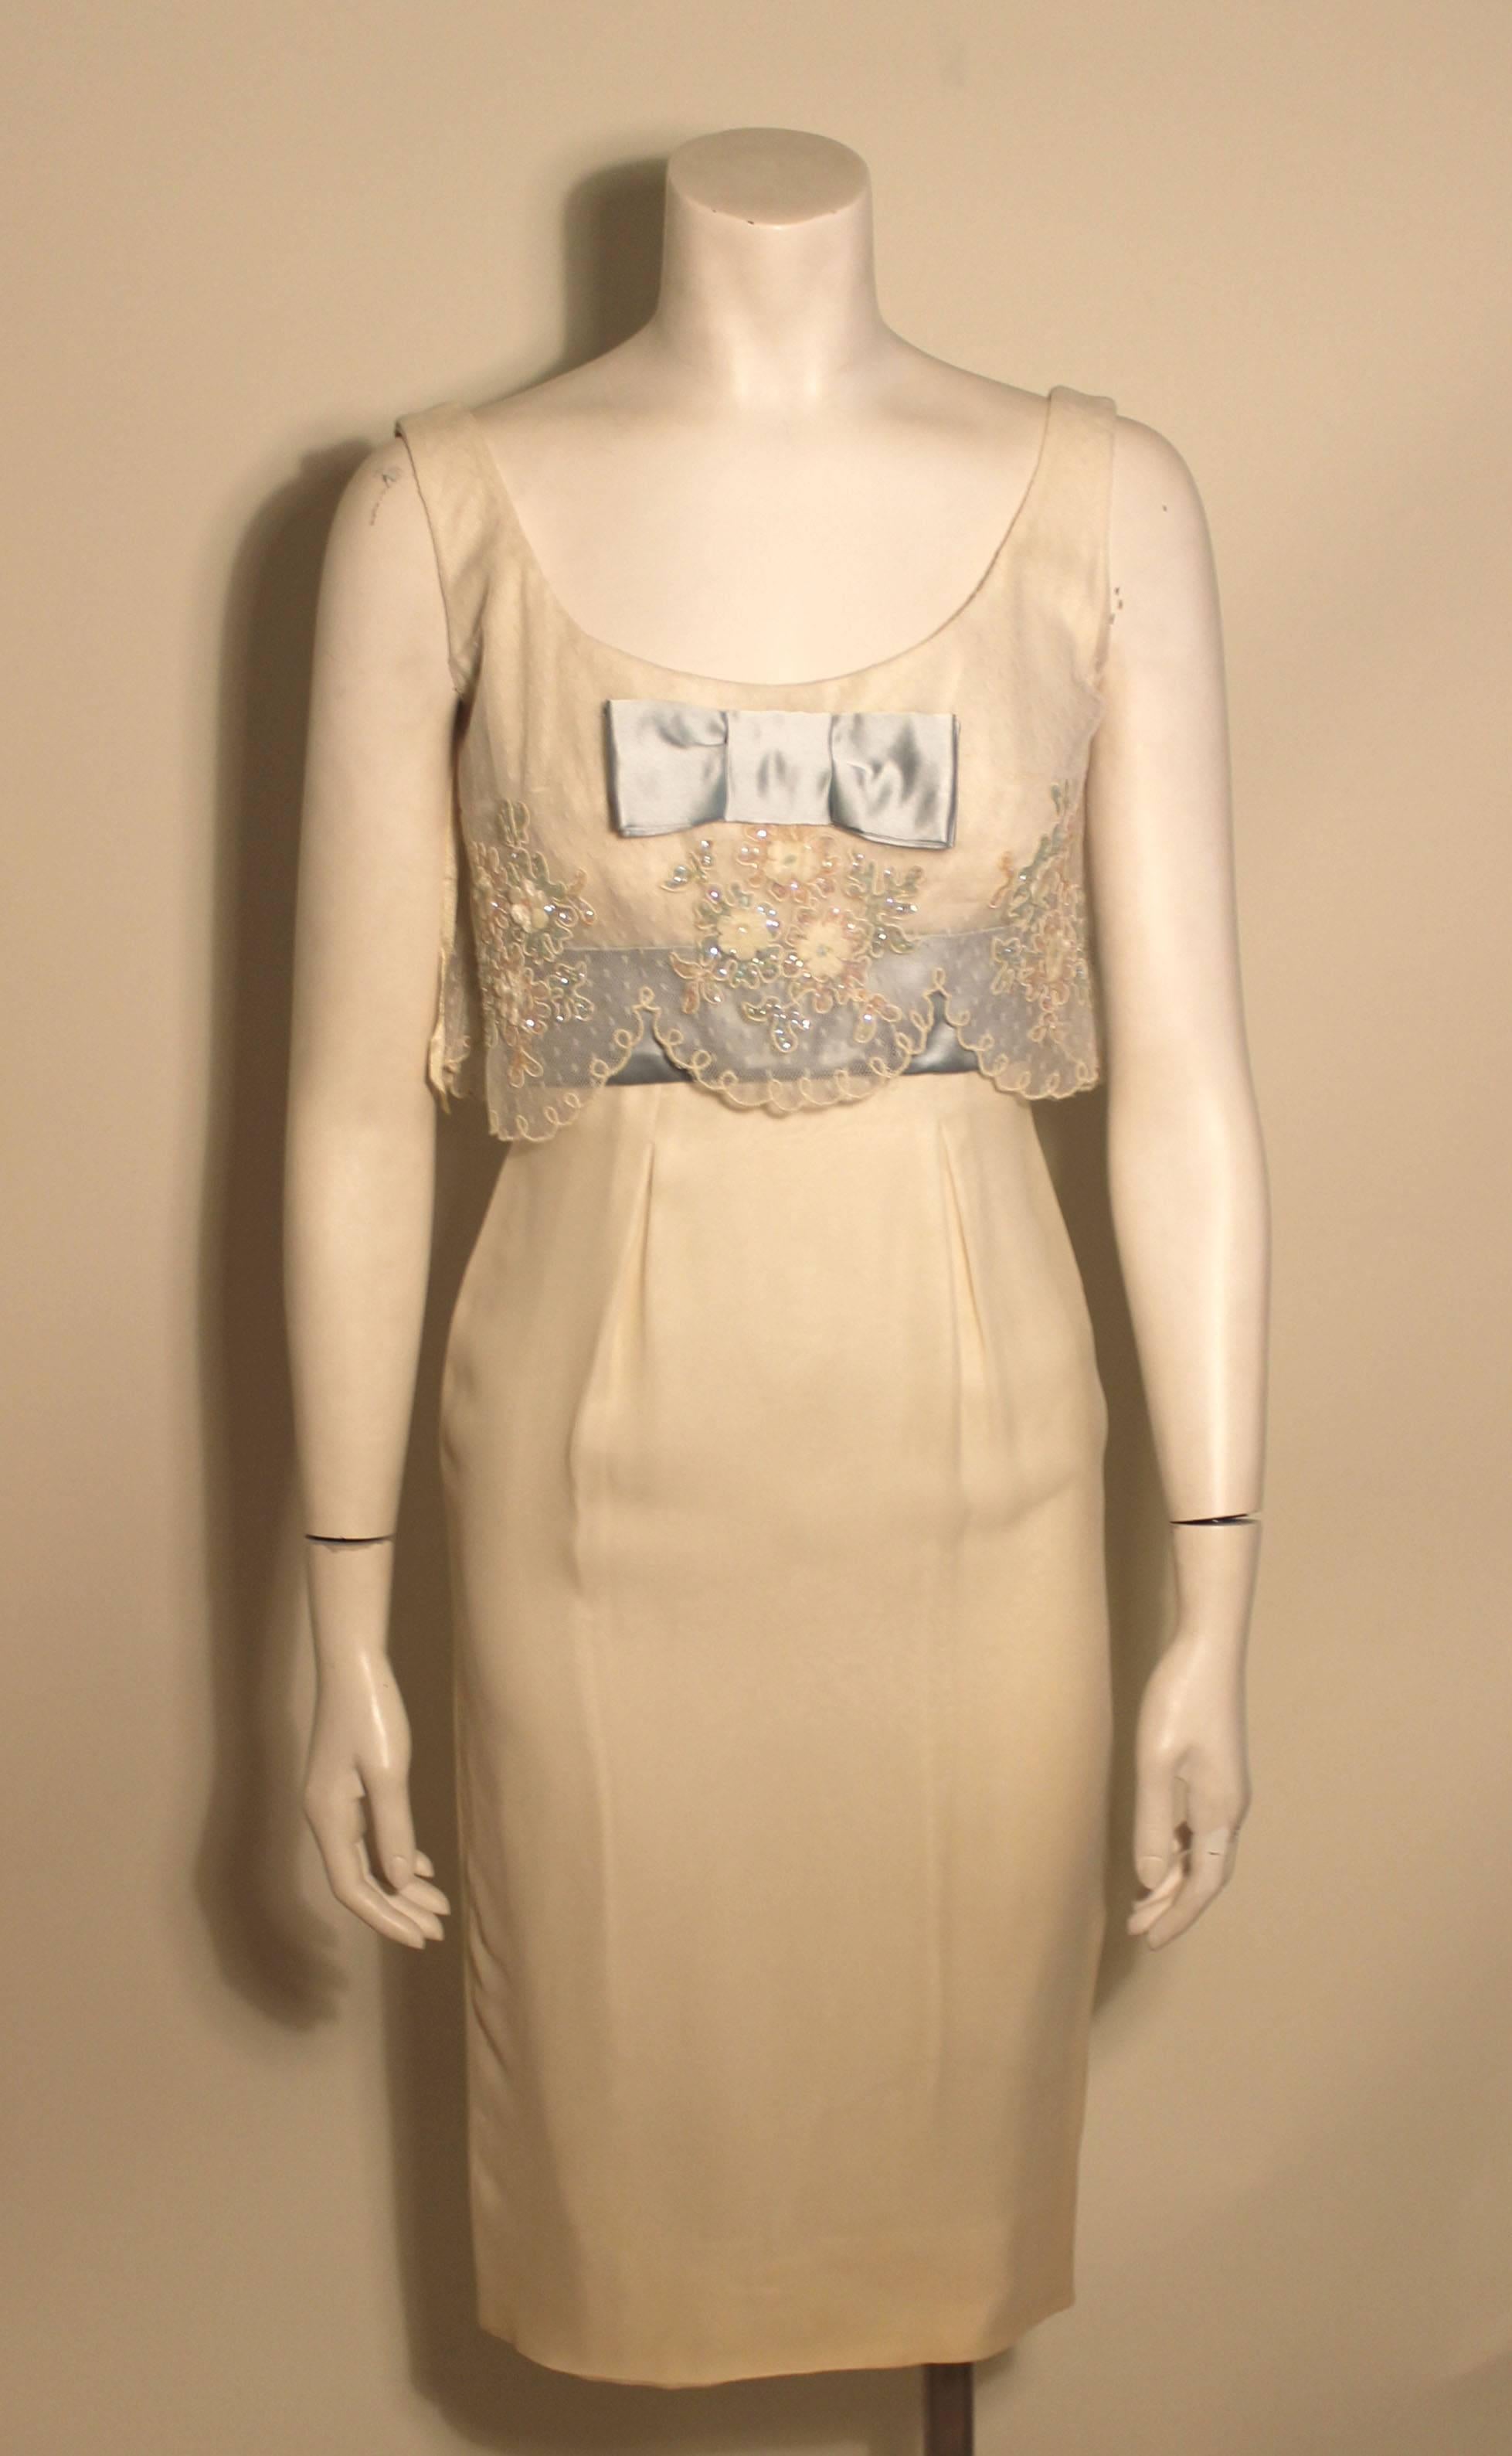 1960's style vintage creme silk crepe Oleg Cassini cocktail dress featuring a lace bodice embellished with sequined appliques and trimmed with pale blue satin ribbon.